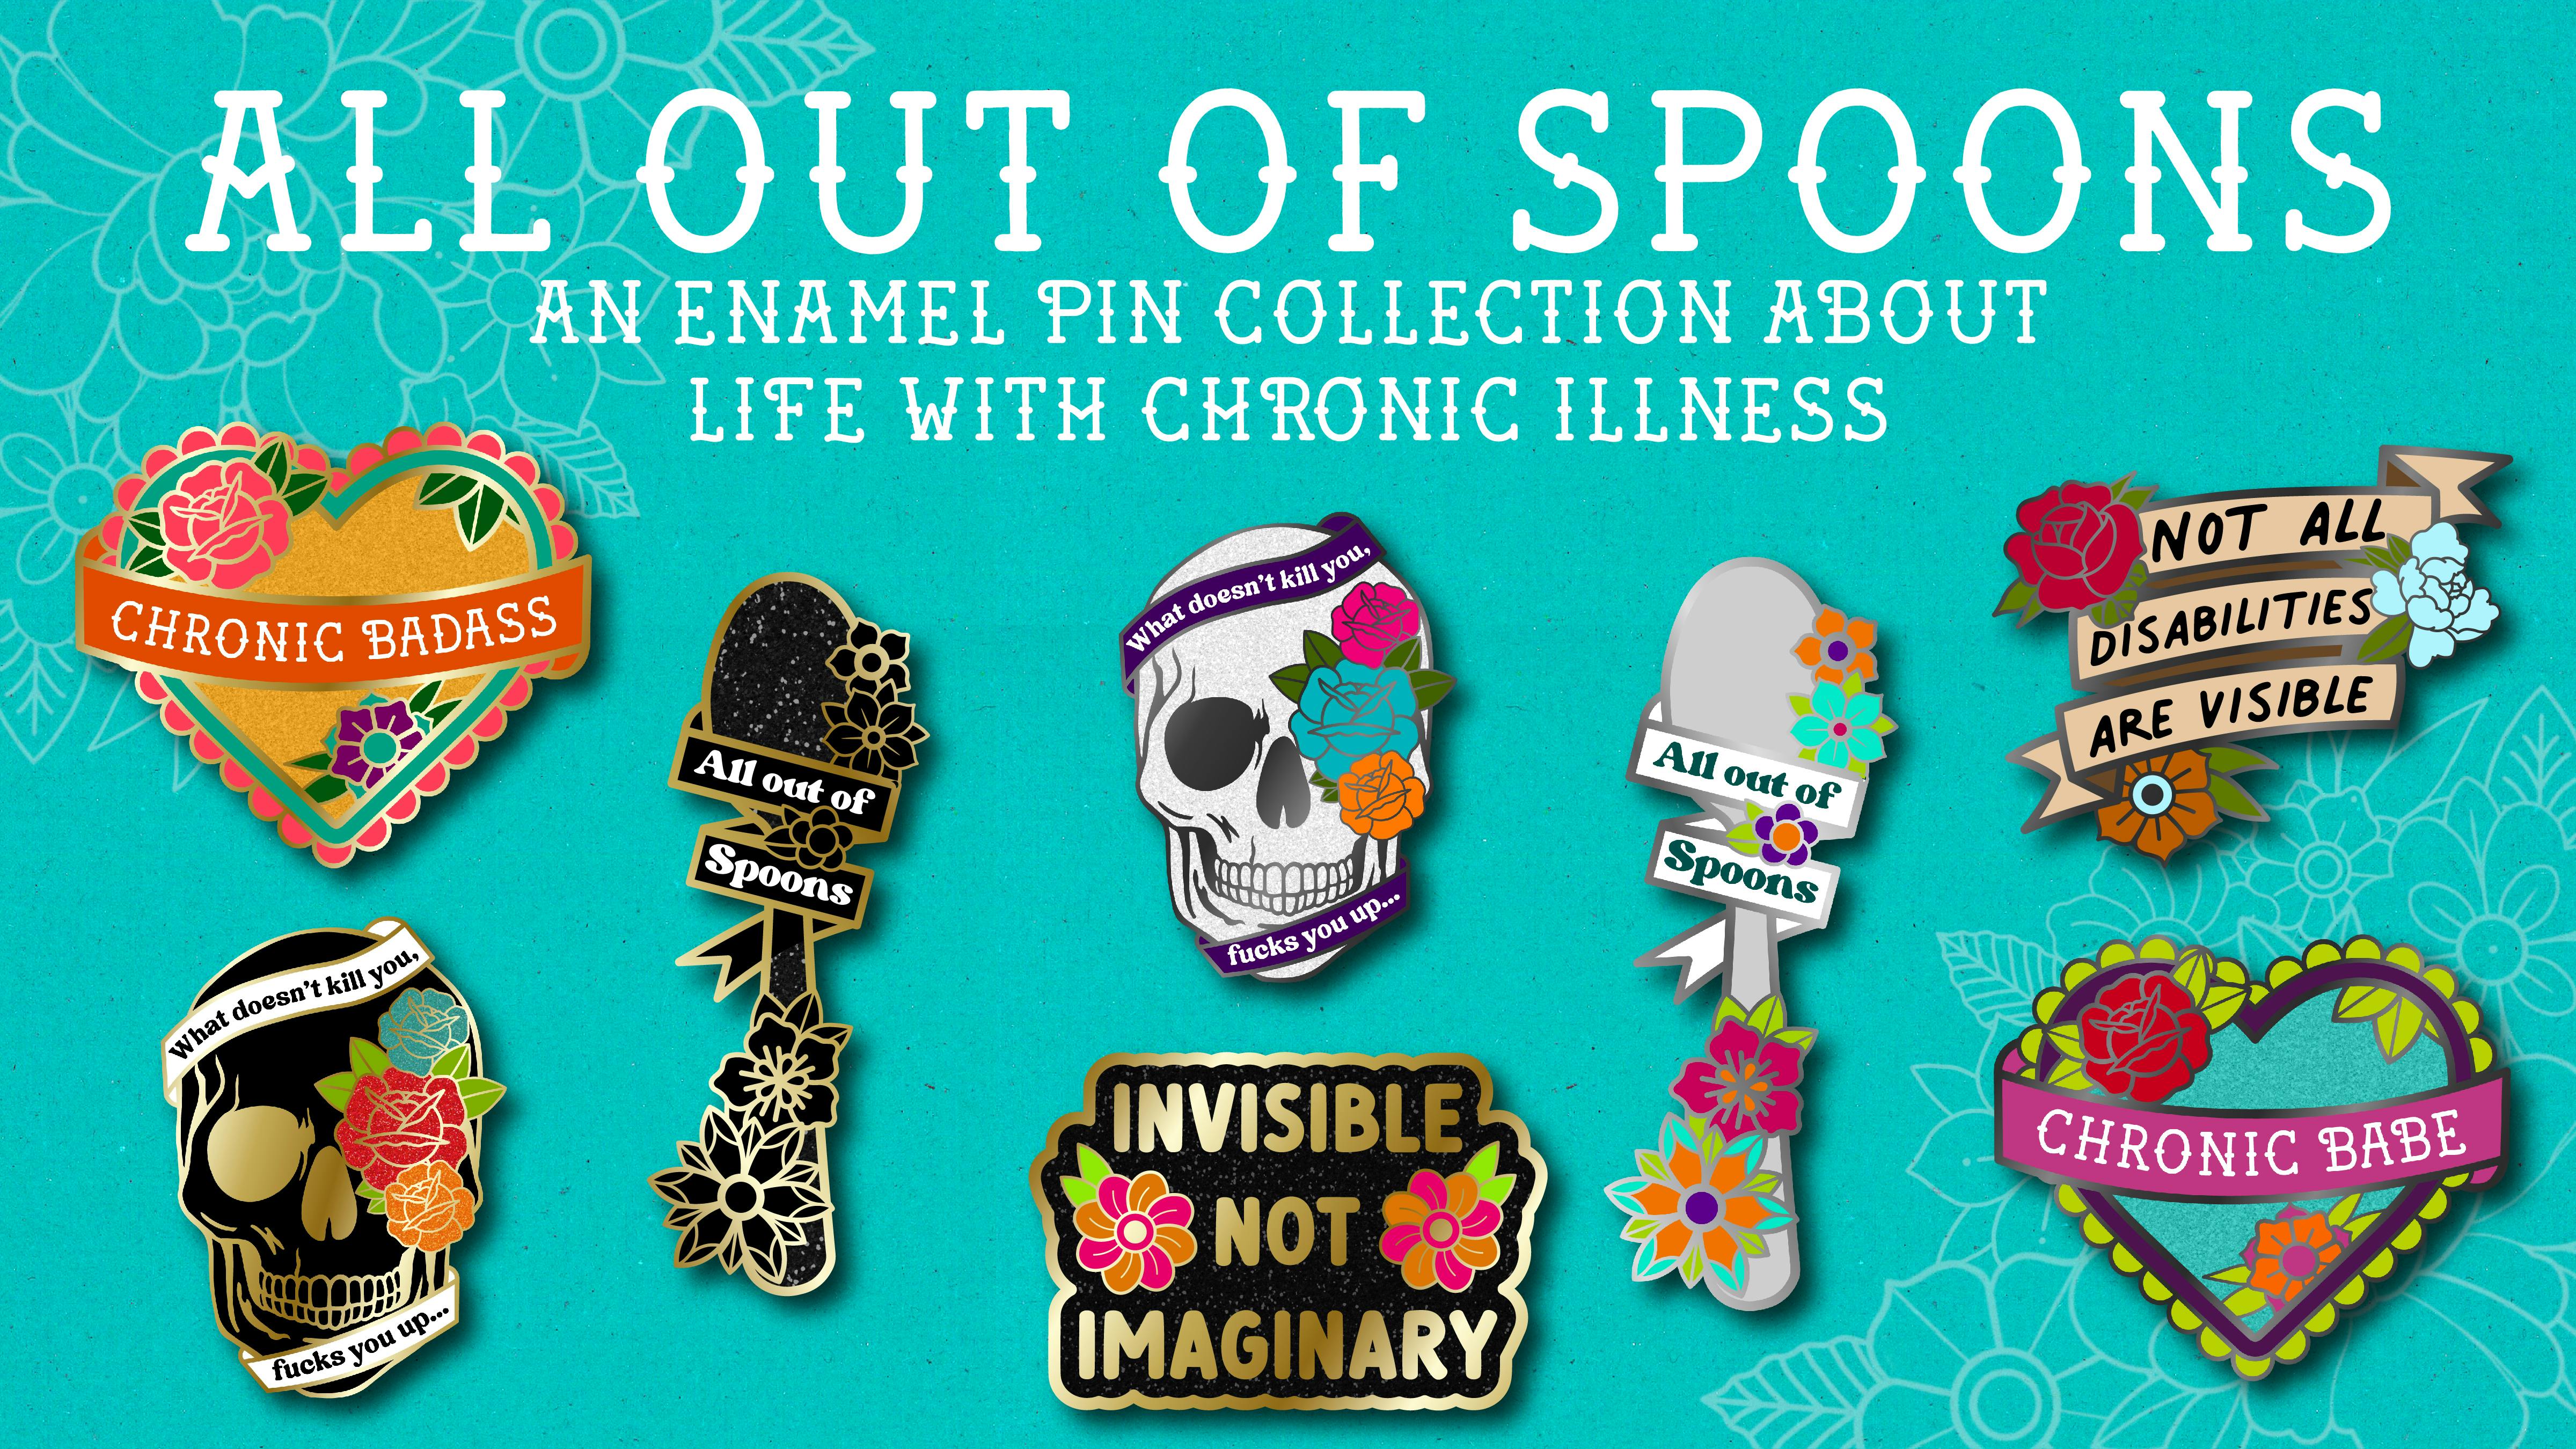 All Out of Spoons - A pin collection about chronic health - BackerKit